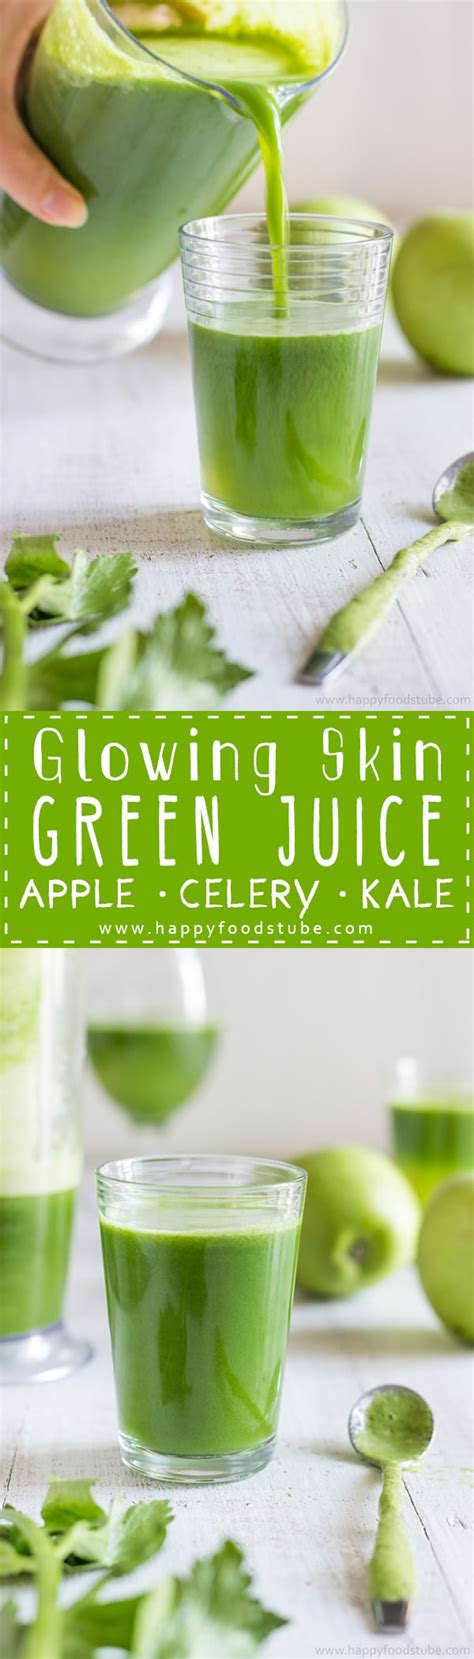 Having a healthy juice helps detox the body by getting rid of free radicals, cleansing the digestive system and stimulating the liver and kidney. Glowing Skin Green Juice Recipe - Happy Foods Tube